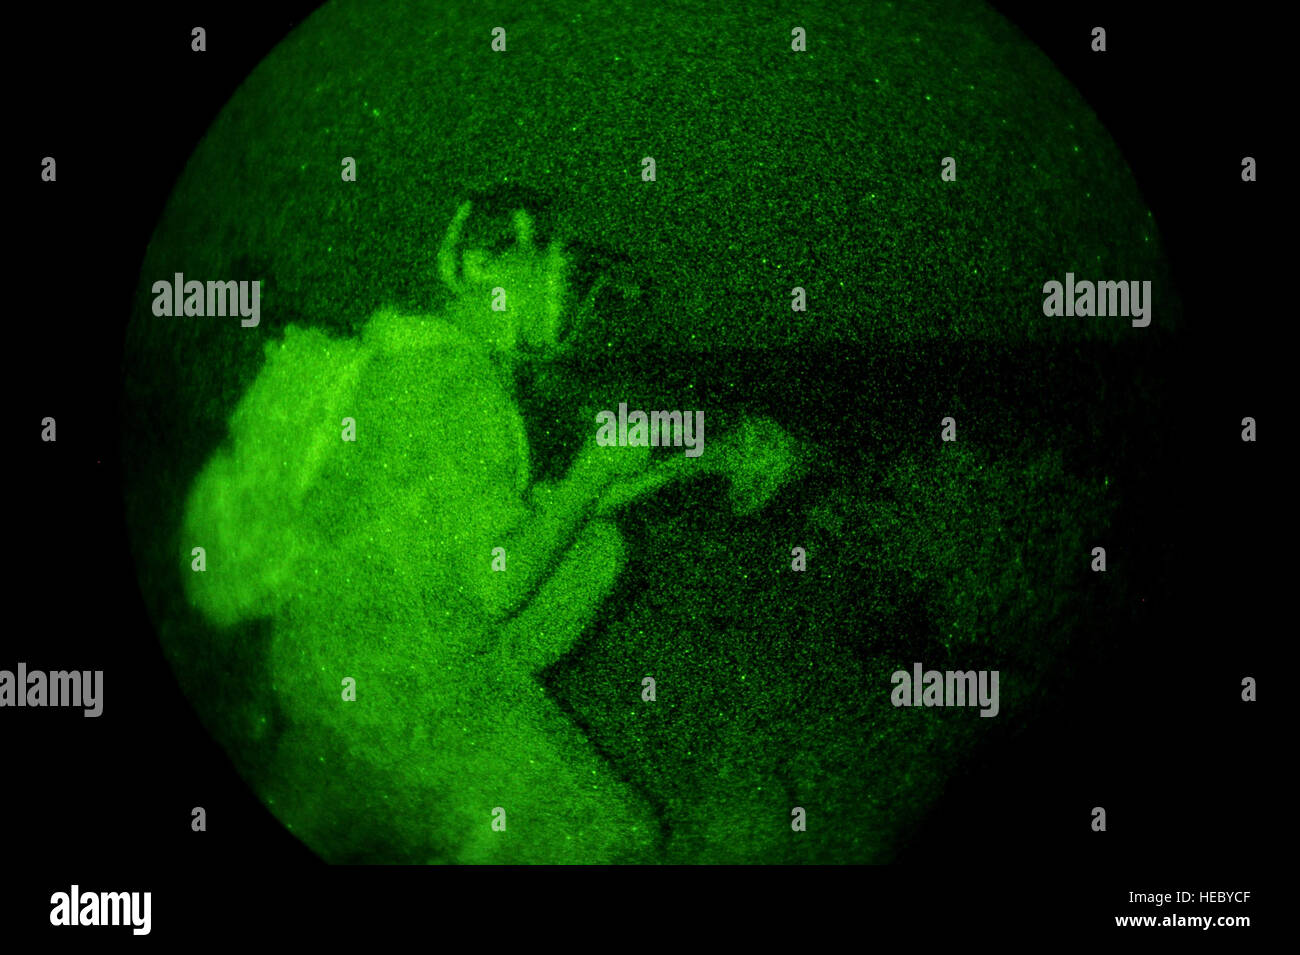 A Djiboutian army soldier kneels at his post during a night vision goggle class in Arta, Djibouti, on March 25, 2012. The U.S. Army's 3rd Squadron, 124th Cavalry Regiment, deployed in support of Combined Joint Task Force - Horn of Africa (CJTF-HOA), is helping train Djiboutian army soldiers for an upcoming deployment to Somalia. Stock Photo